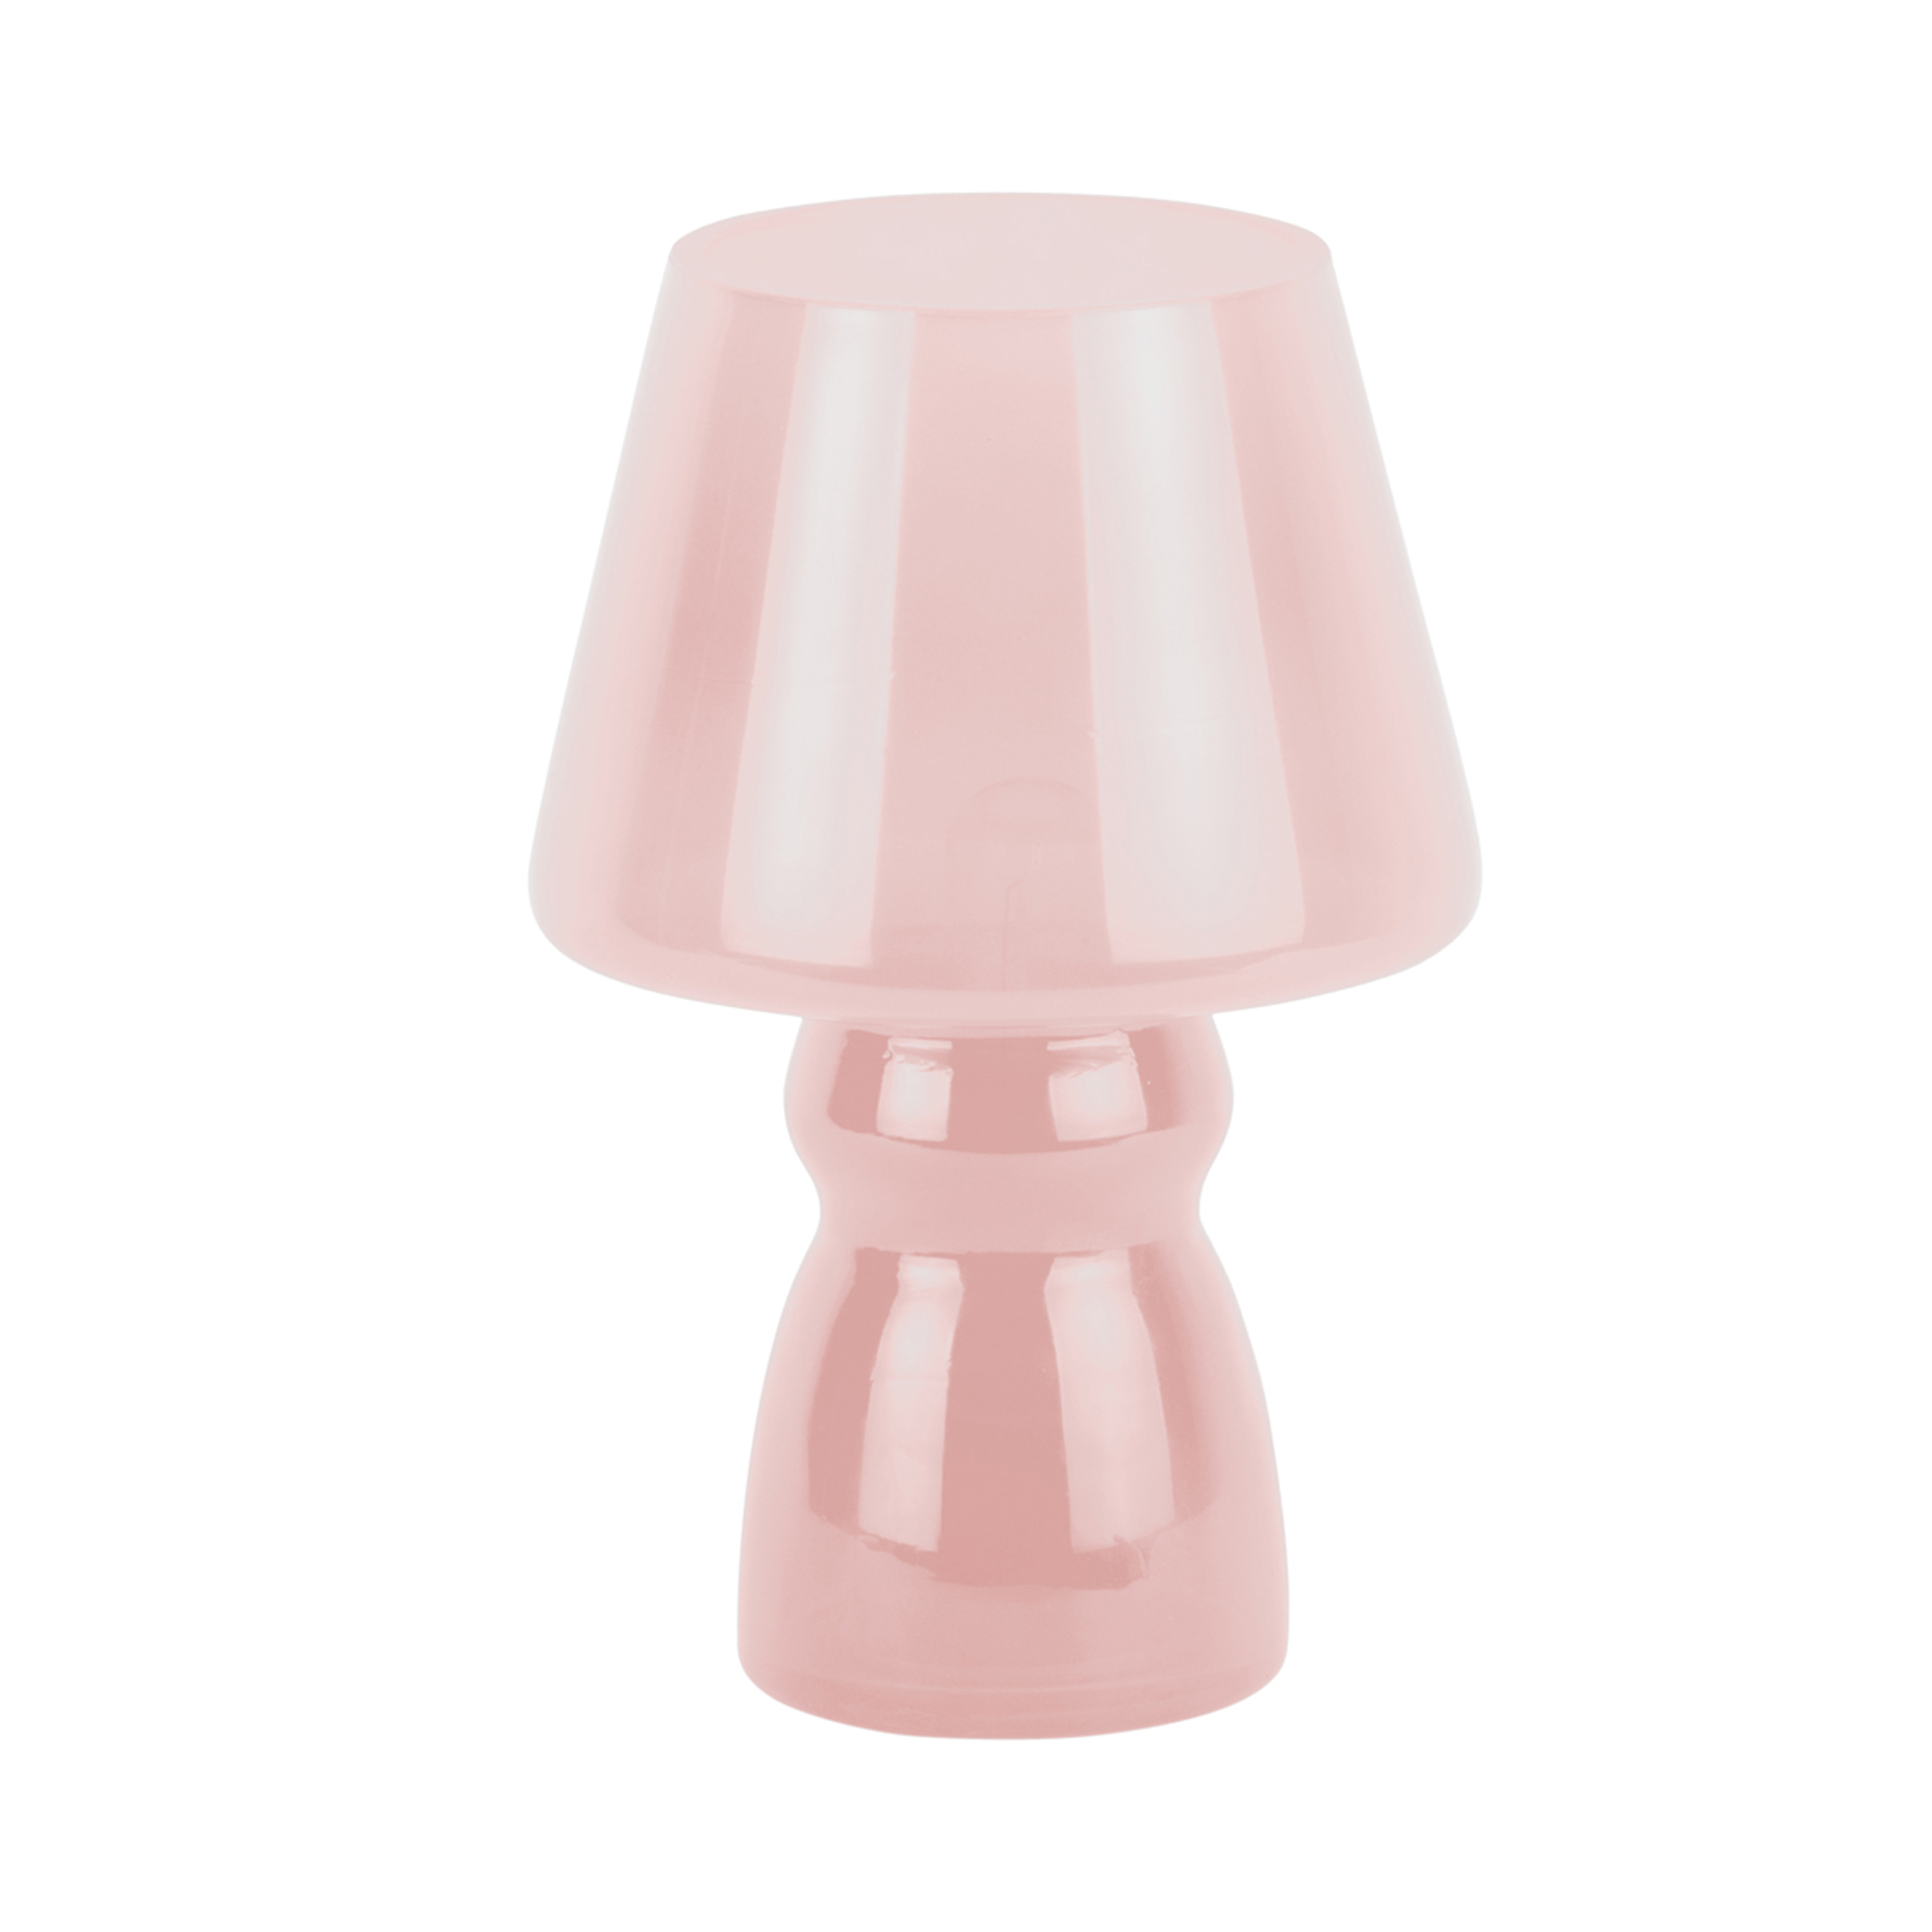 Letimov Classic Glass Portable Table Lamp - Soft Pink